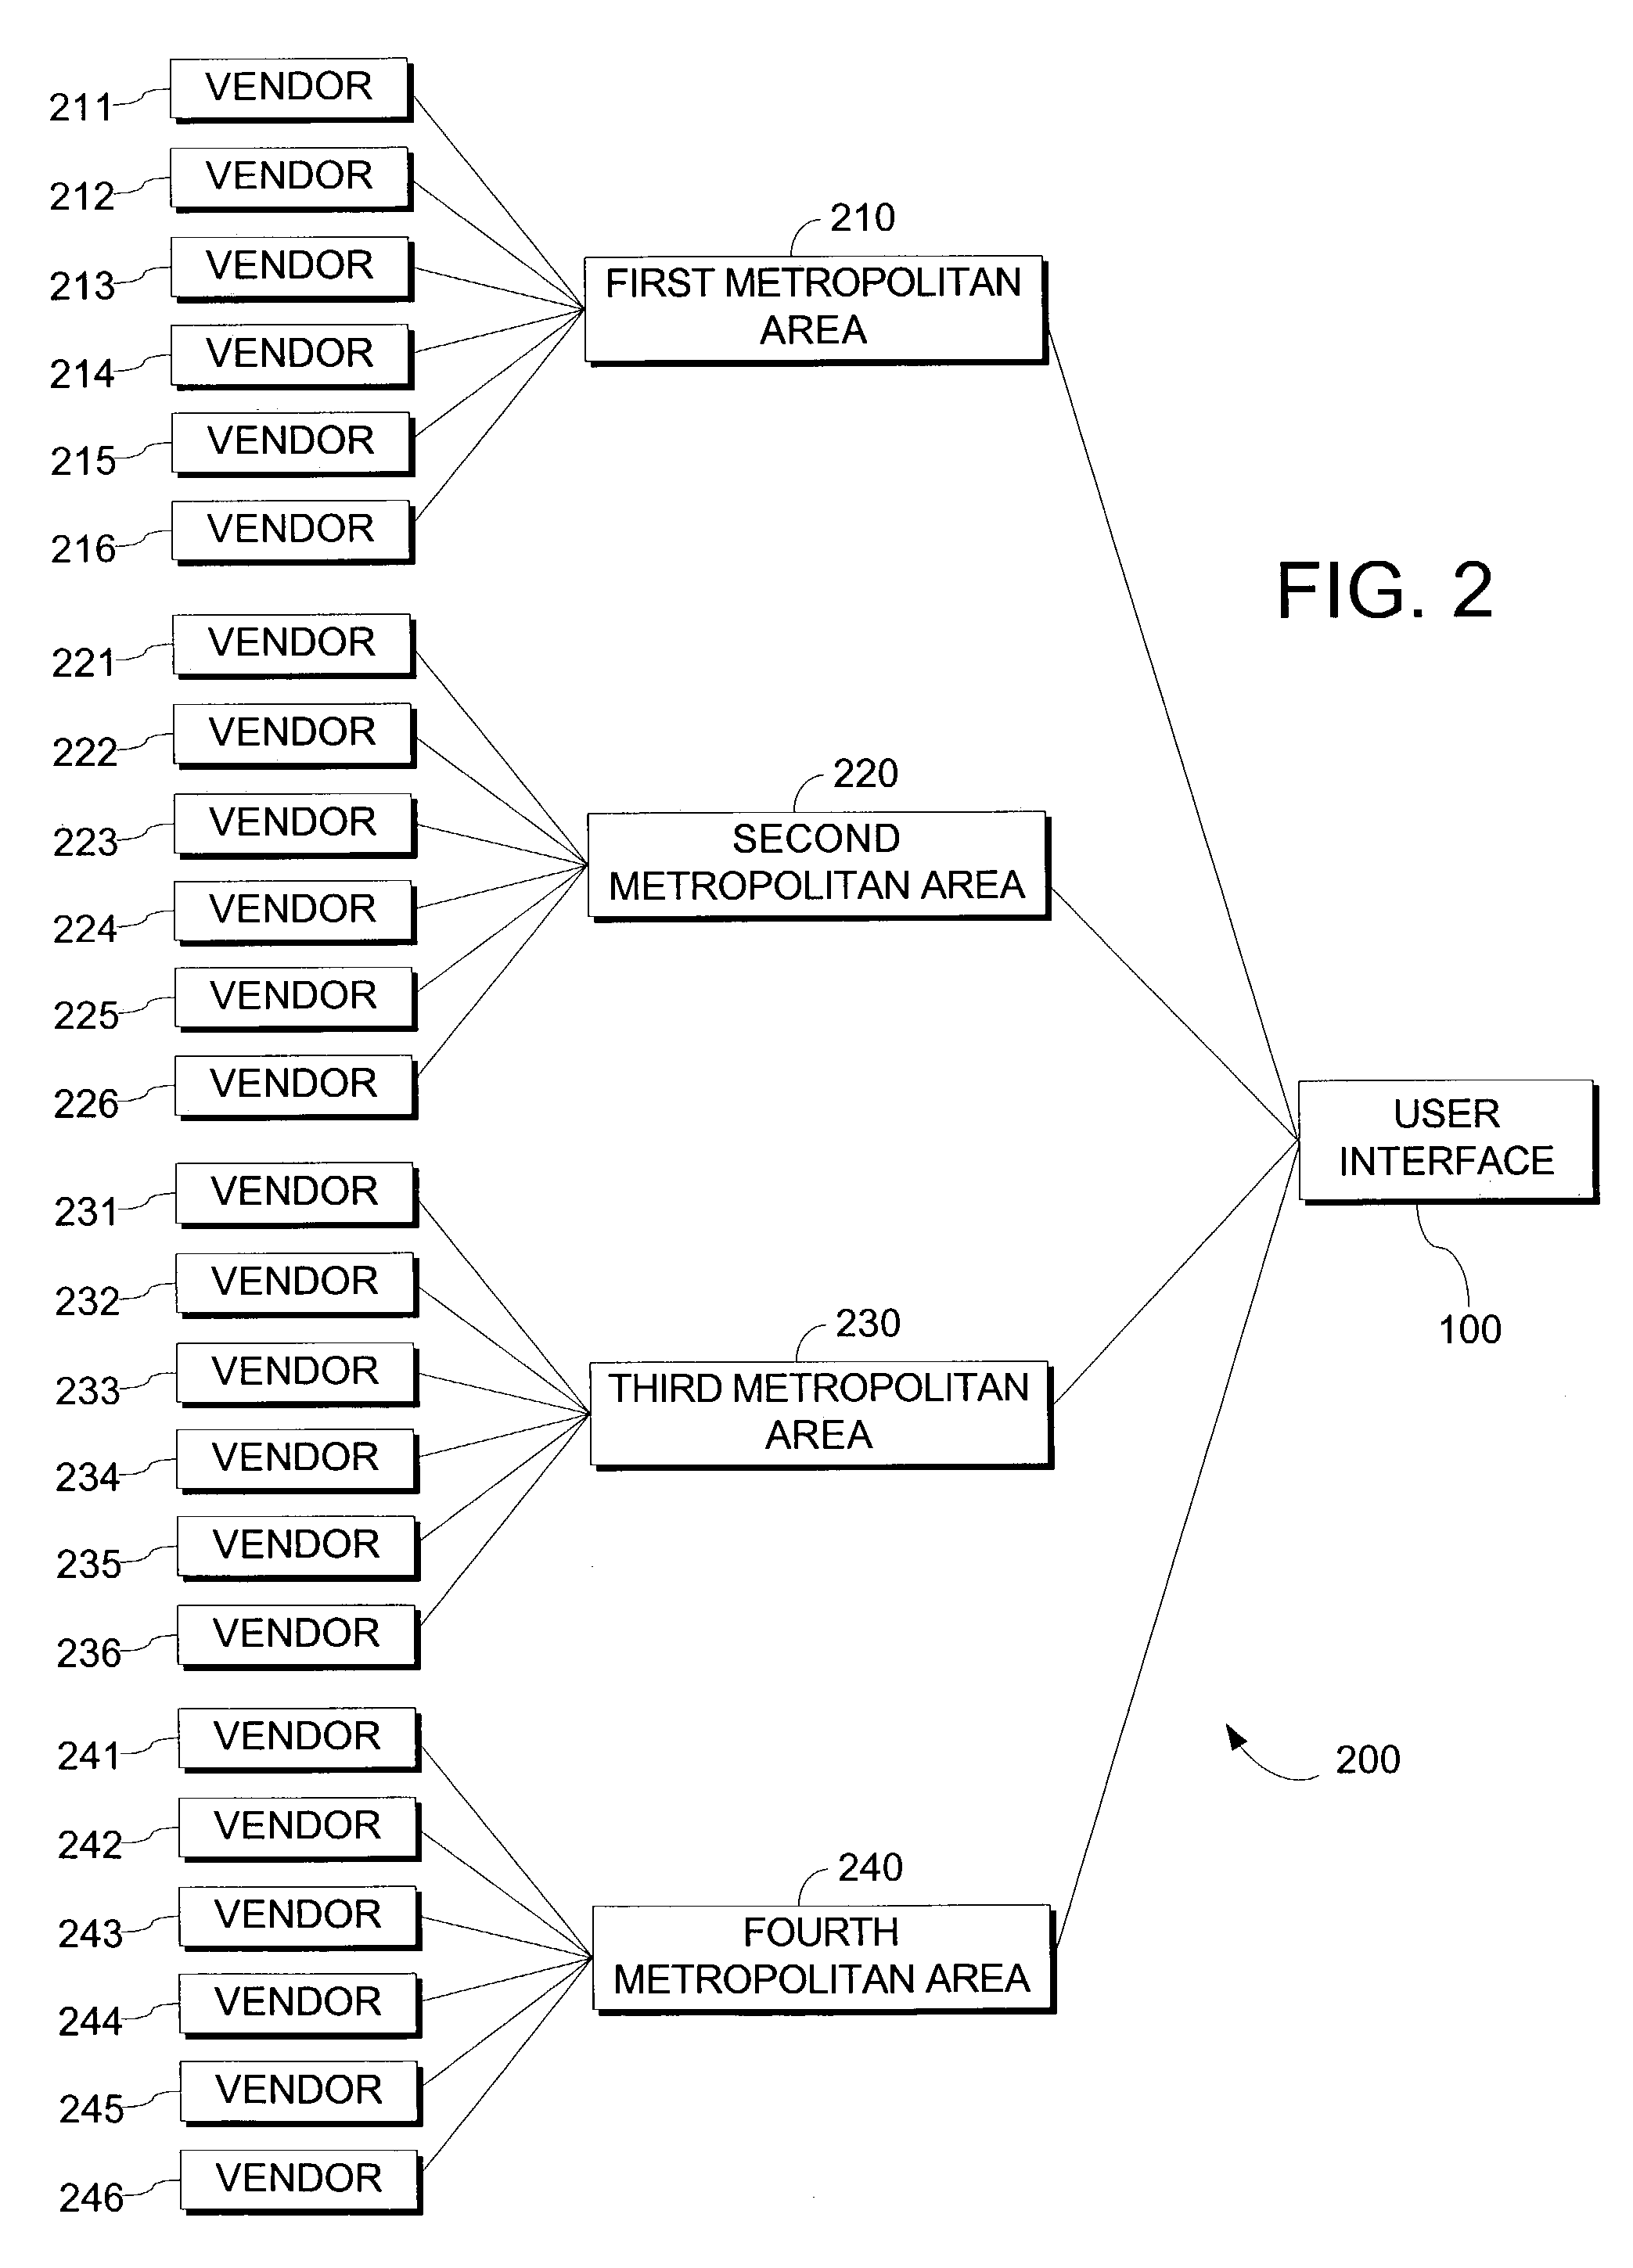 System and method for mapping deployment status of high bandwidth metropolitan area networks